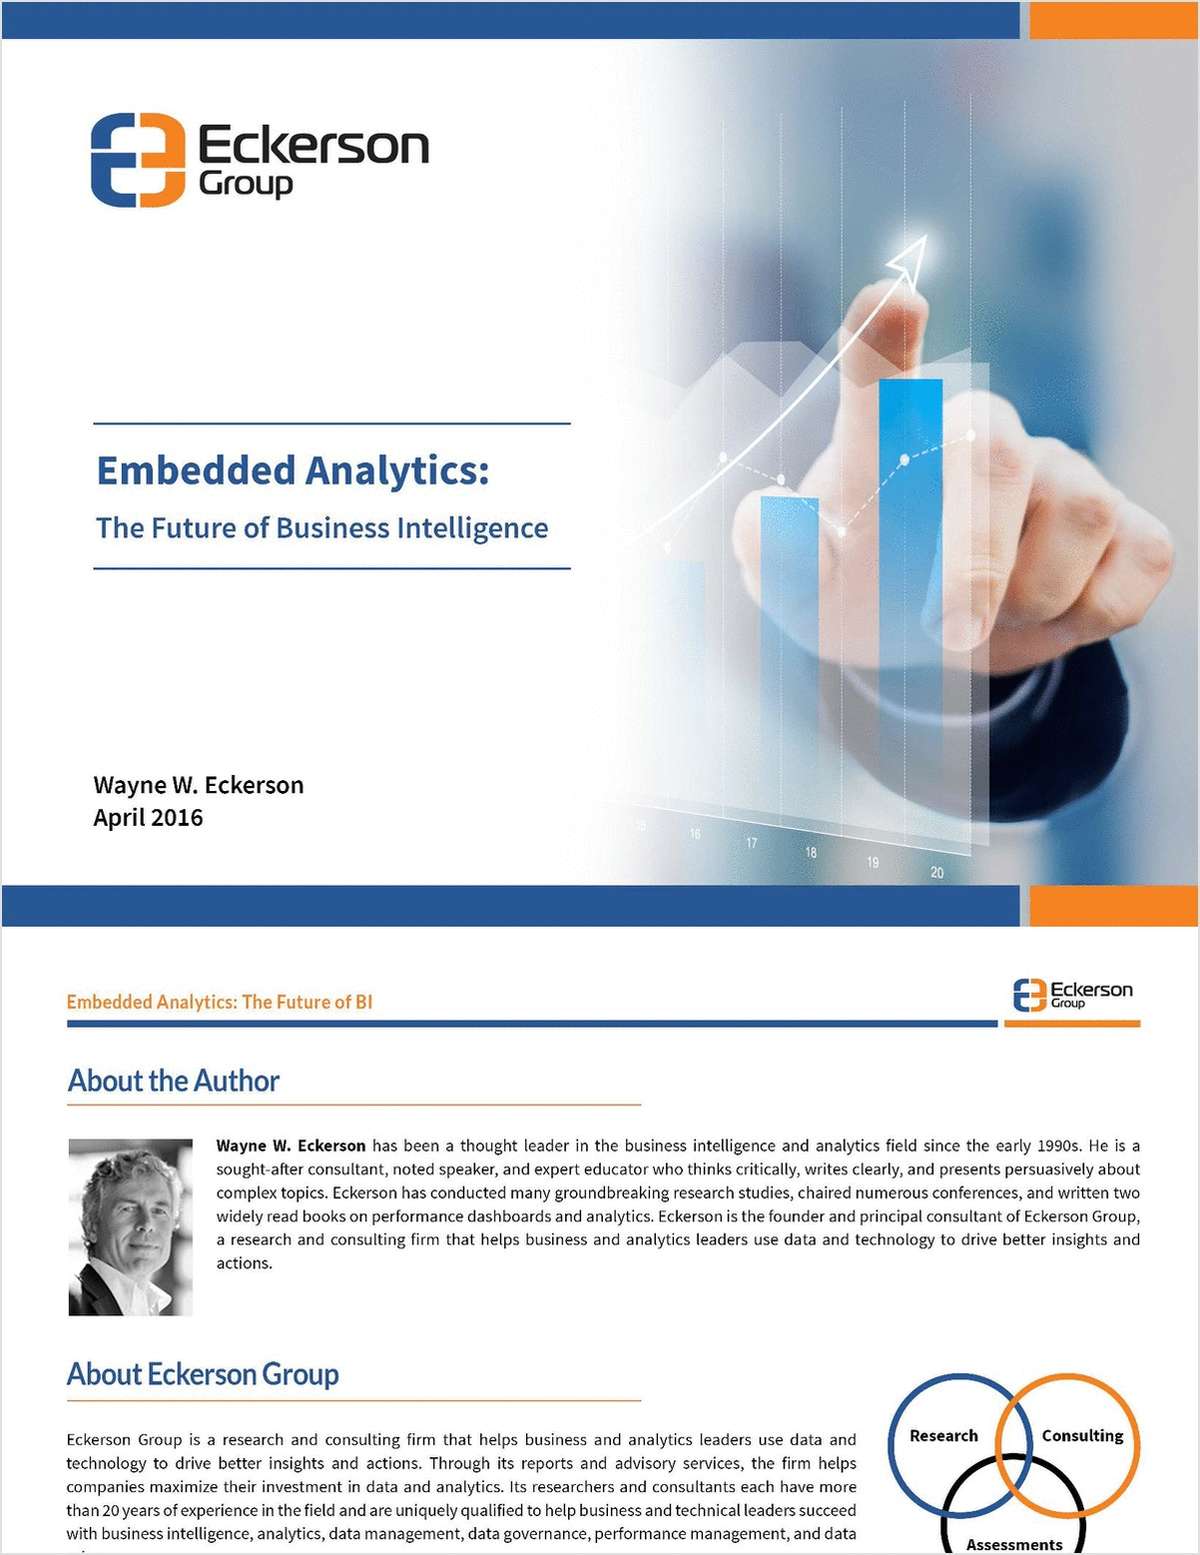 Eckerson Group Embedded Analytics: The Future of BI